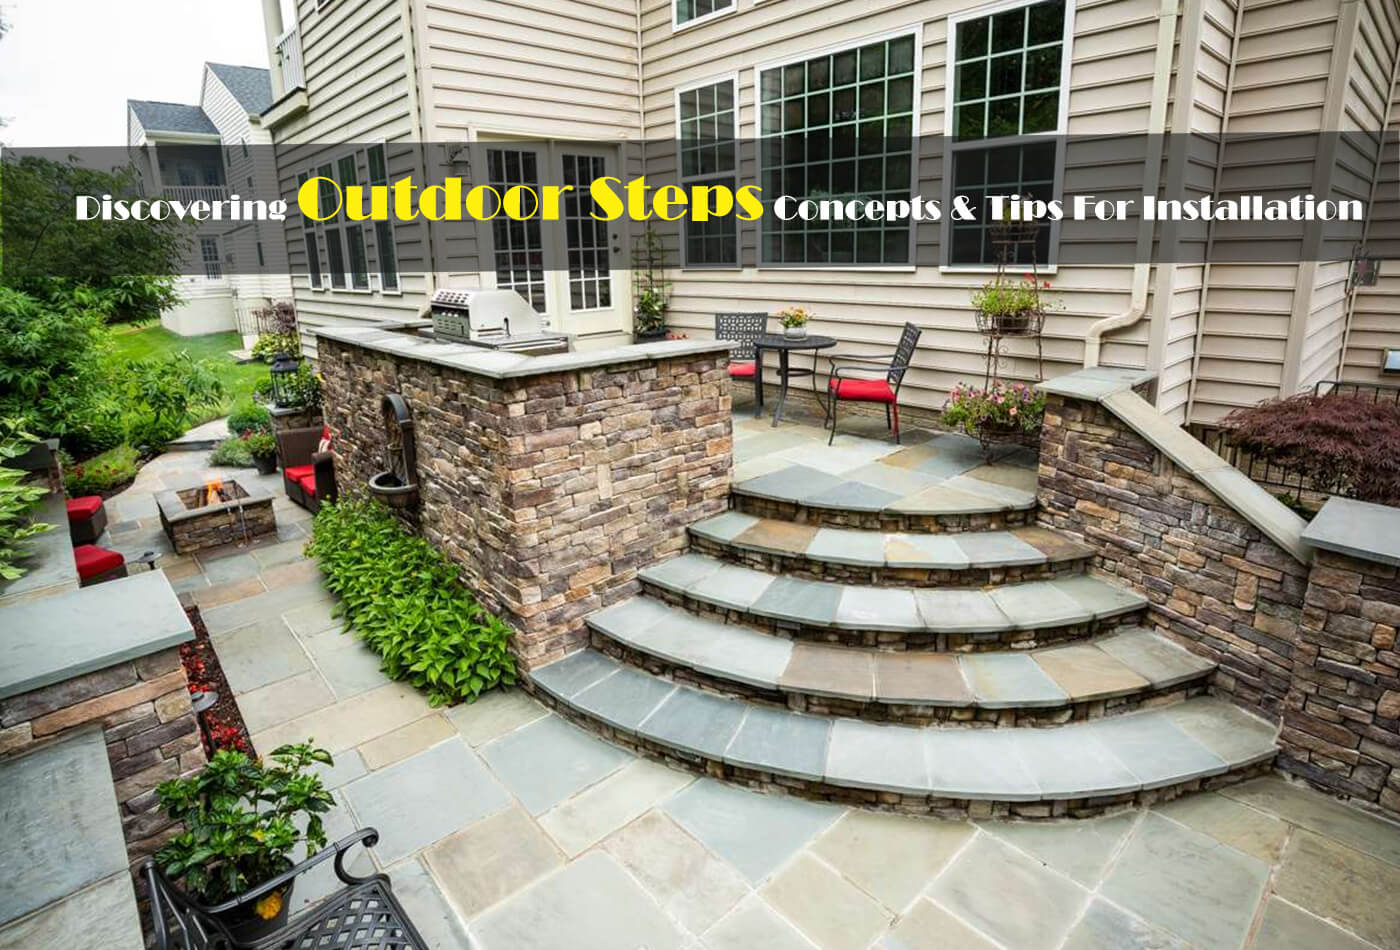 Discovering Outdoor Steps Concepts & Tips For Installation